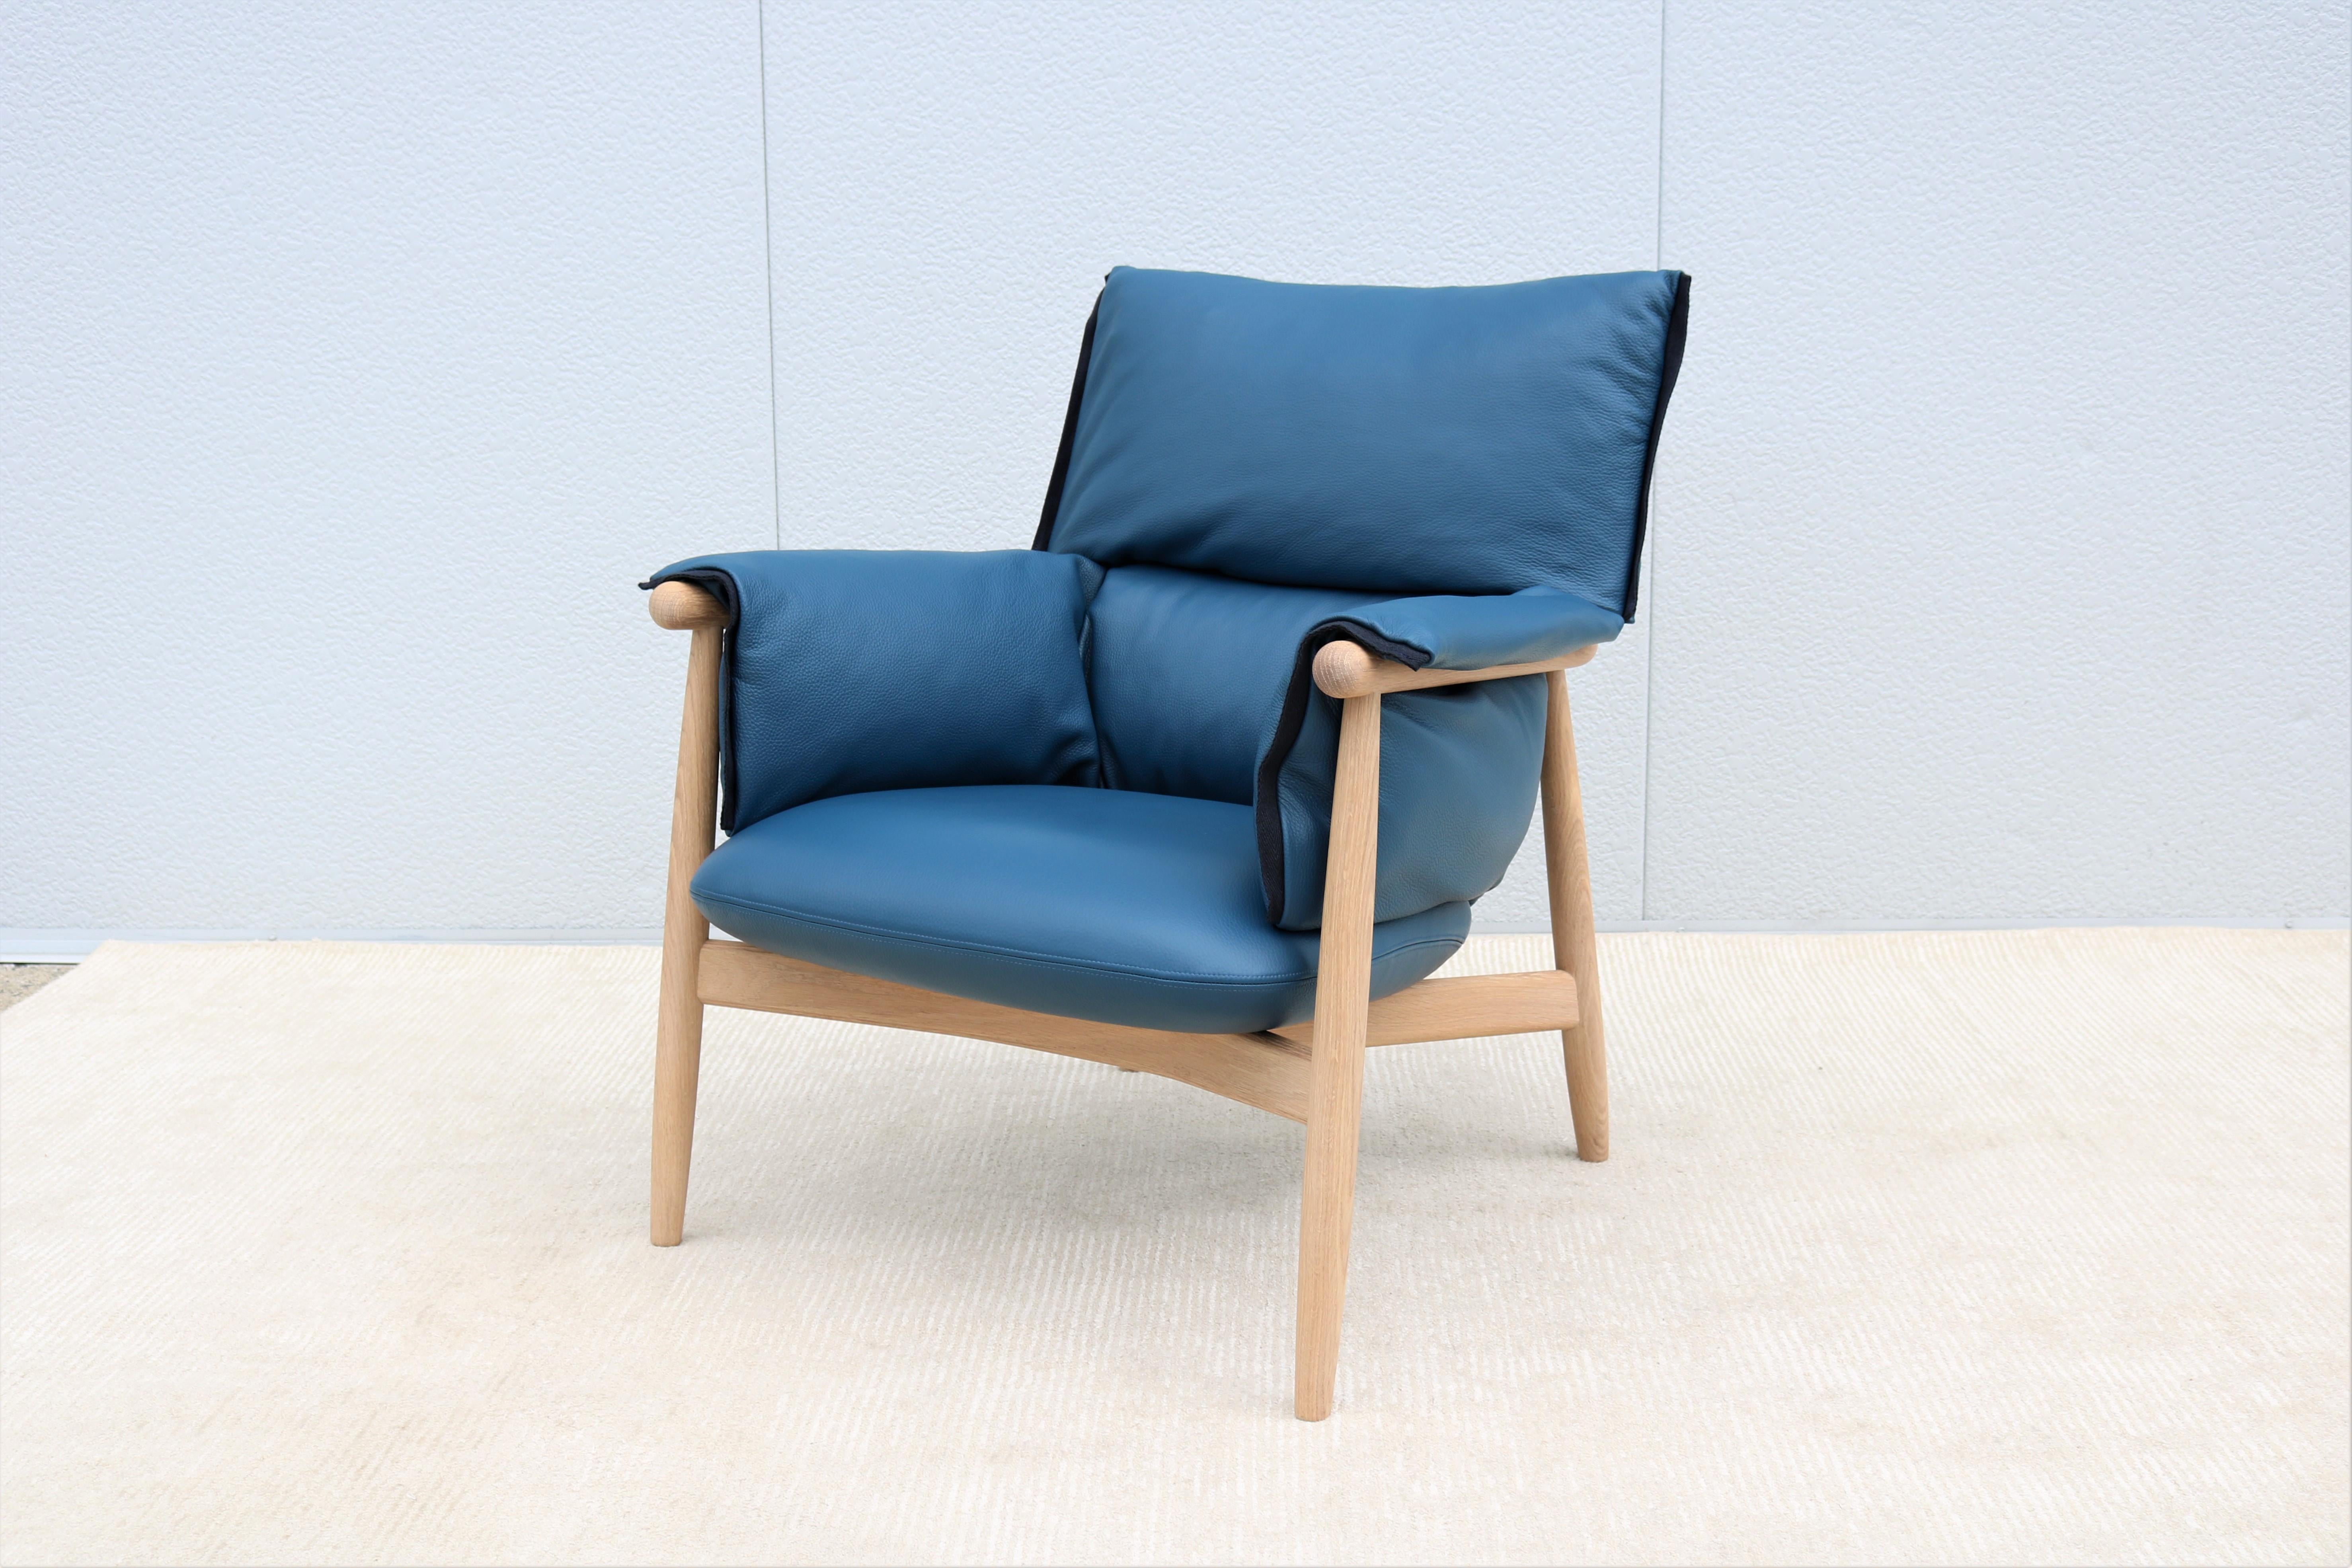 The elegant E015 Embrace lounge chair was designed by EOOS for Carl Hansen & Son in 2016, to provide superior comfort and relaxation.
The eye-catching design consists of a continuously visible wooden structure with a three-piece, rounded back and